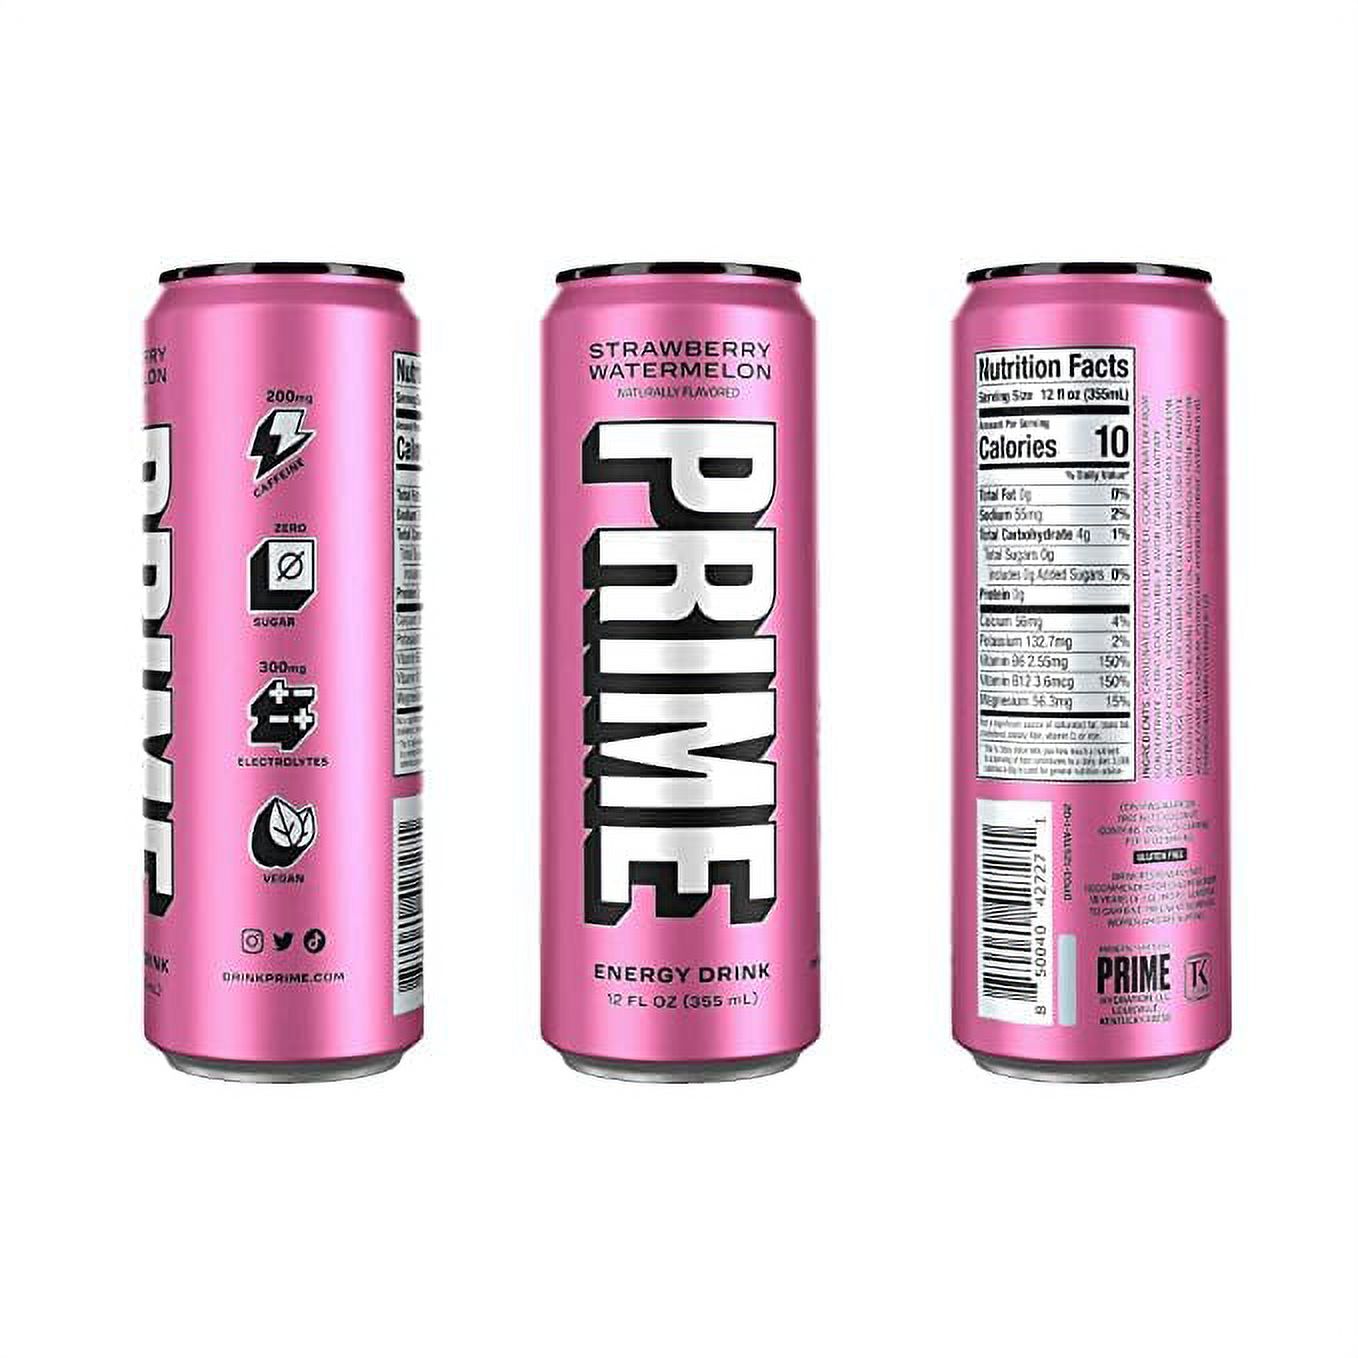 NEW Prime Hydration Drink Energy Cans 5 Flavor Variety Sampler Pack! - 200mg Caffeine, Zero Sugar, 300mg Electrolytes, Vegan - (12 Fl Oz Cans) - (5-Pack)